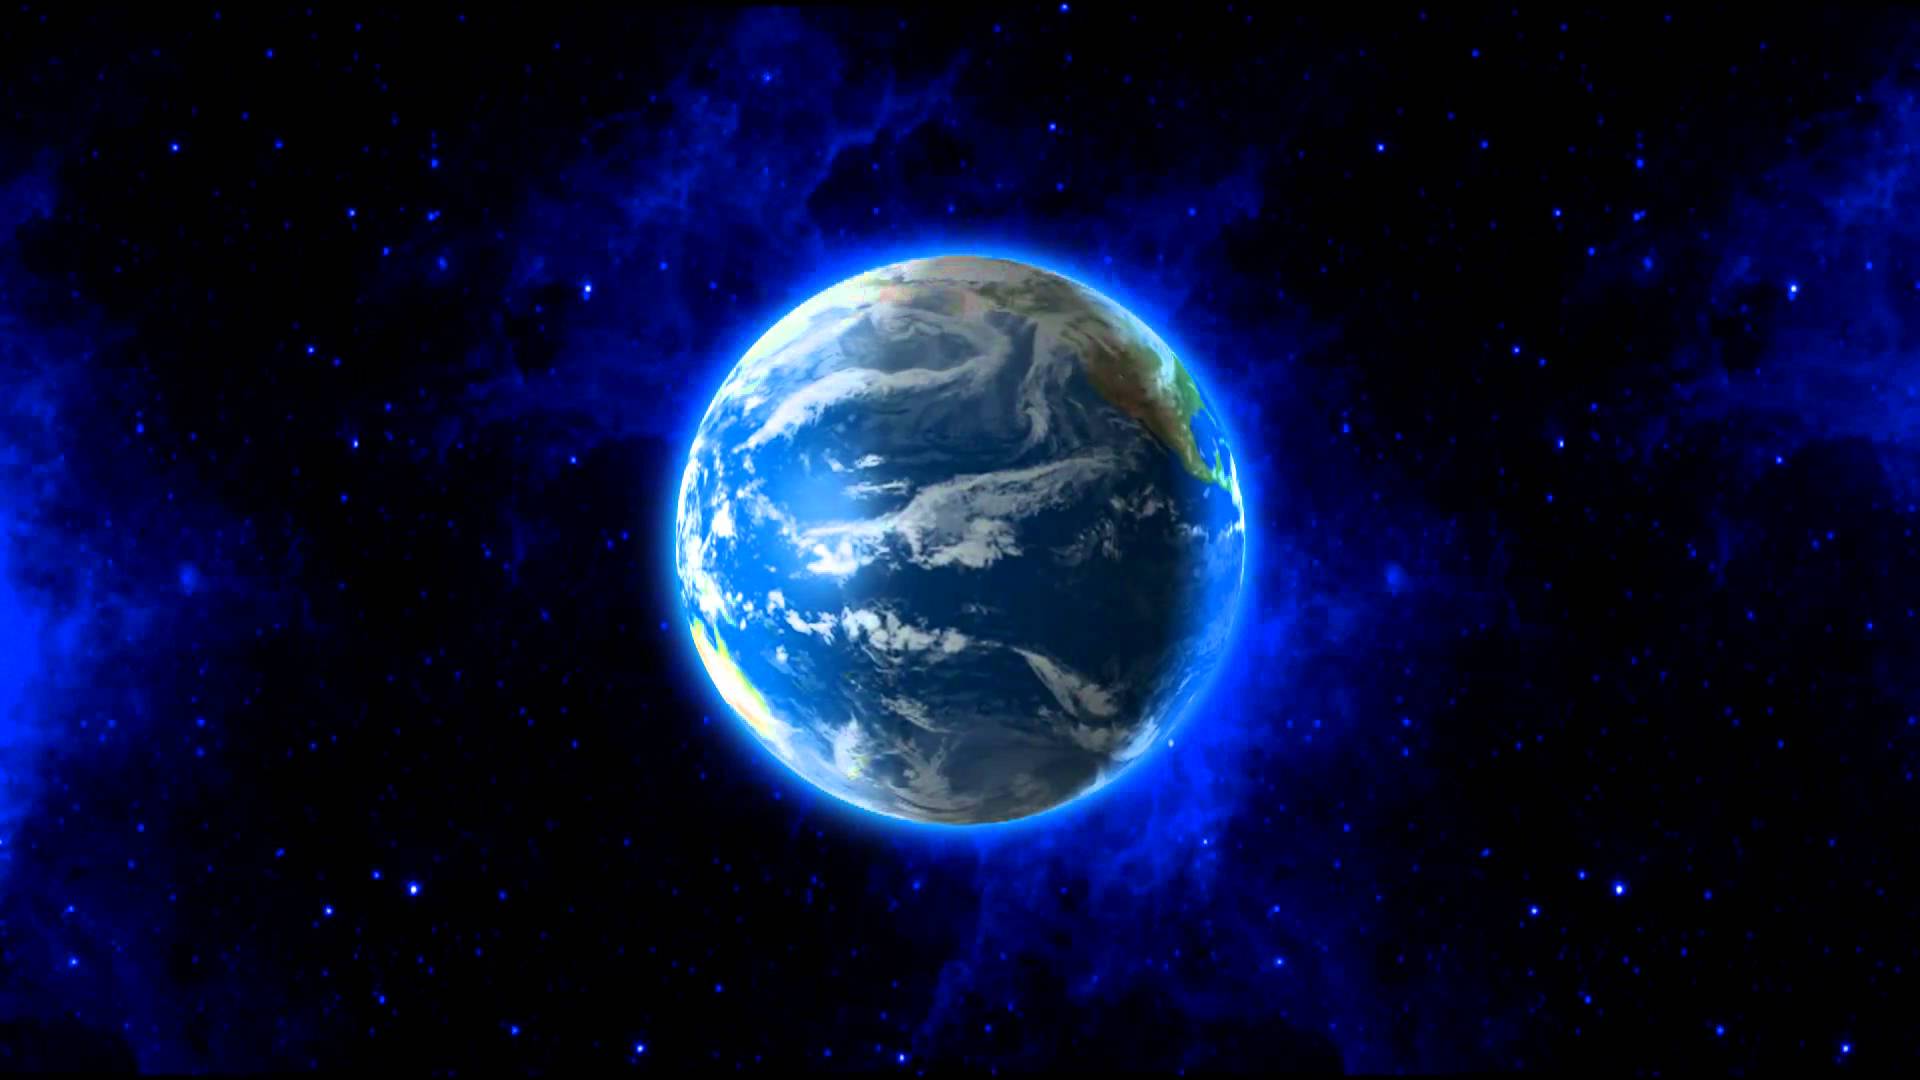 Moving Earth Wallpaper Group , Download for free